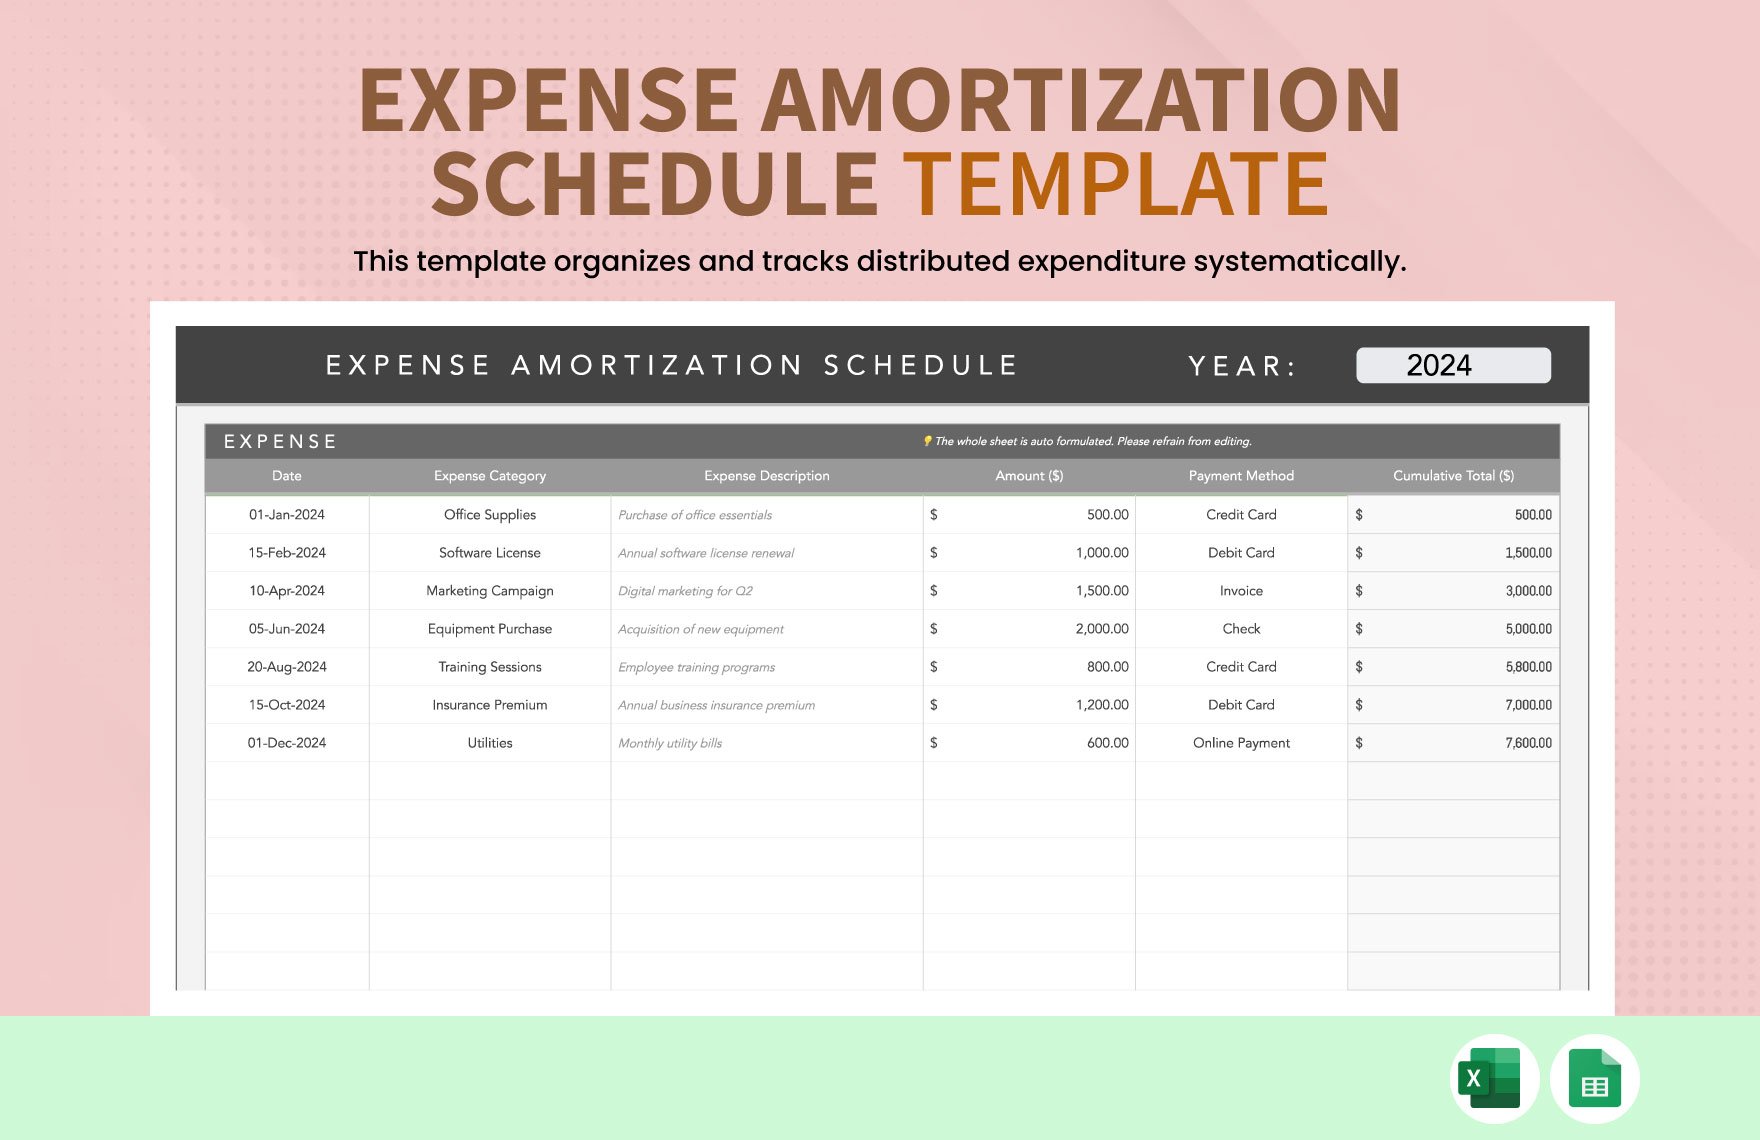 Expense Amortization Schedule Template in Excel, Google Sheets